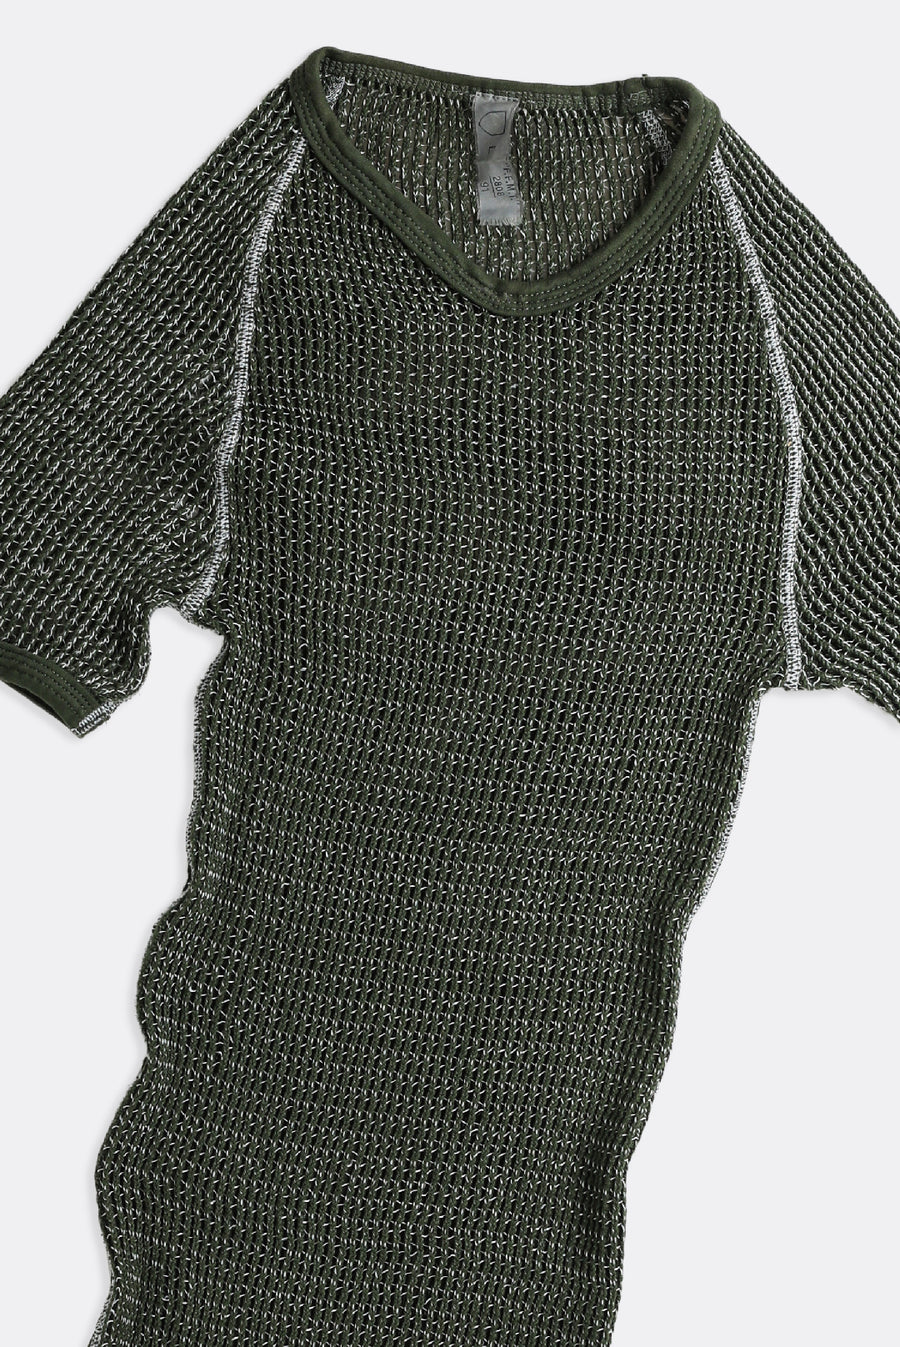 Vintage Knitted Shirt - Brown, White, Tan, Olive, Dark Green, Charcoal